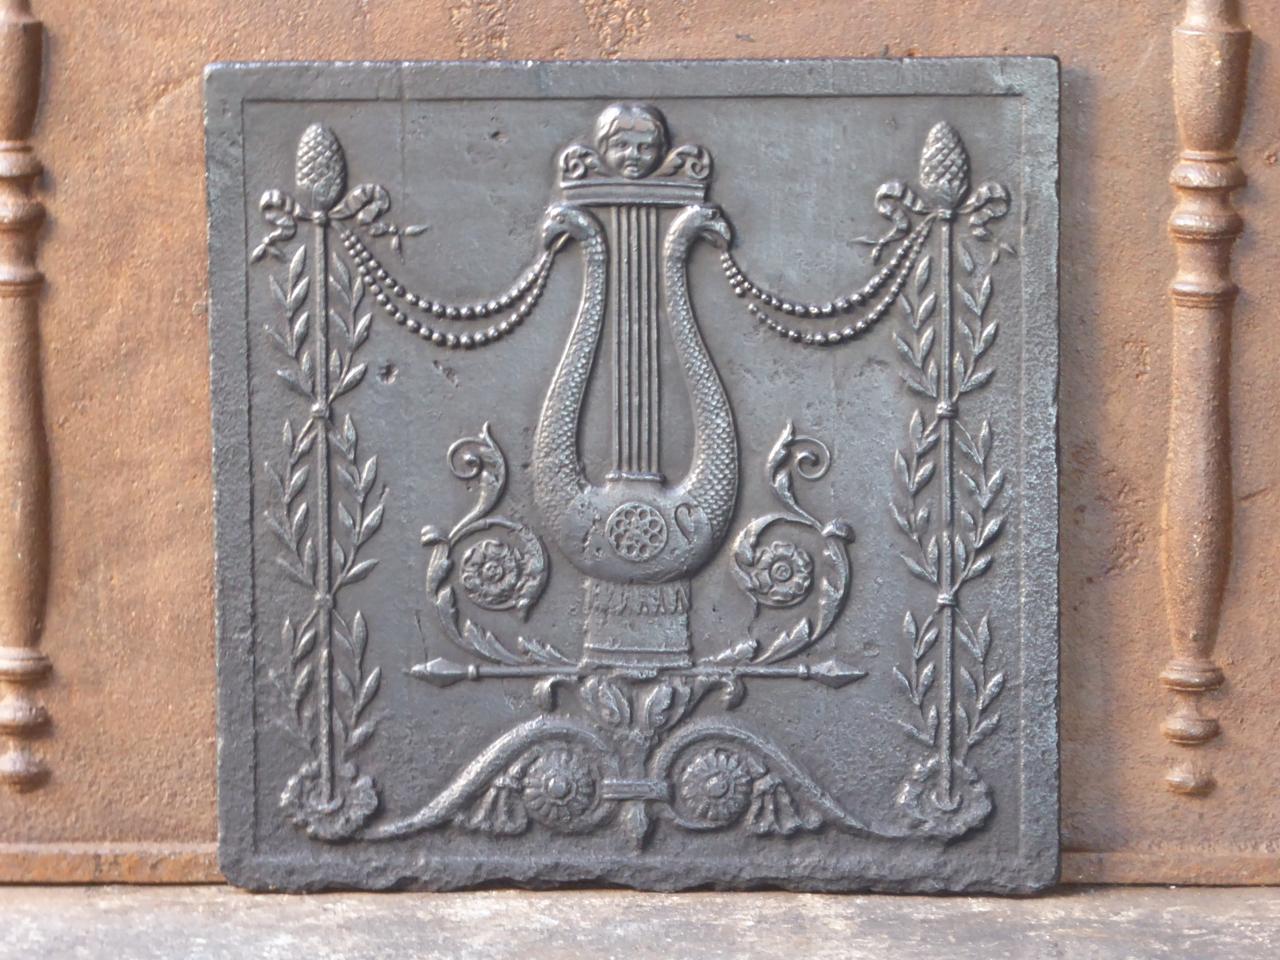 19th century French neoclassical fireback. The fireback is made of cast iron and has a black patina. It is in a good condition, without any cracks.